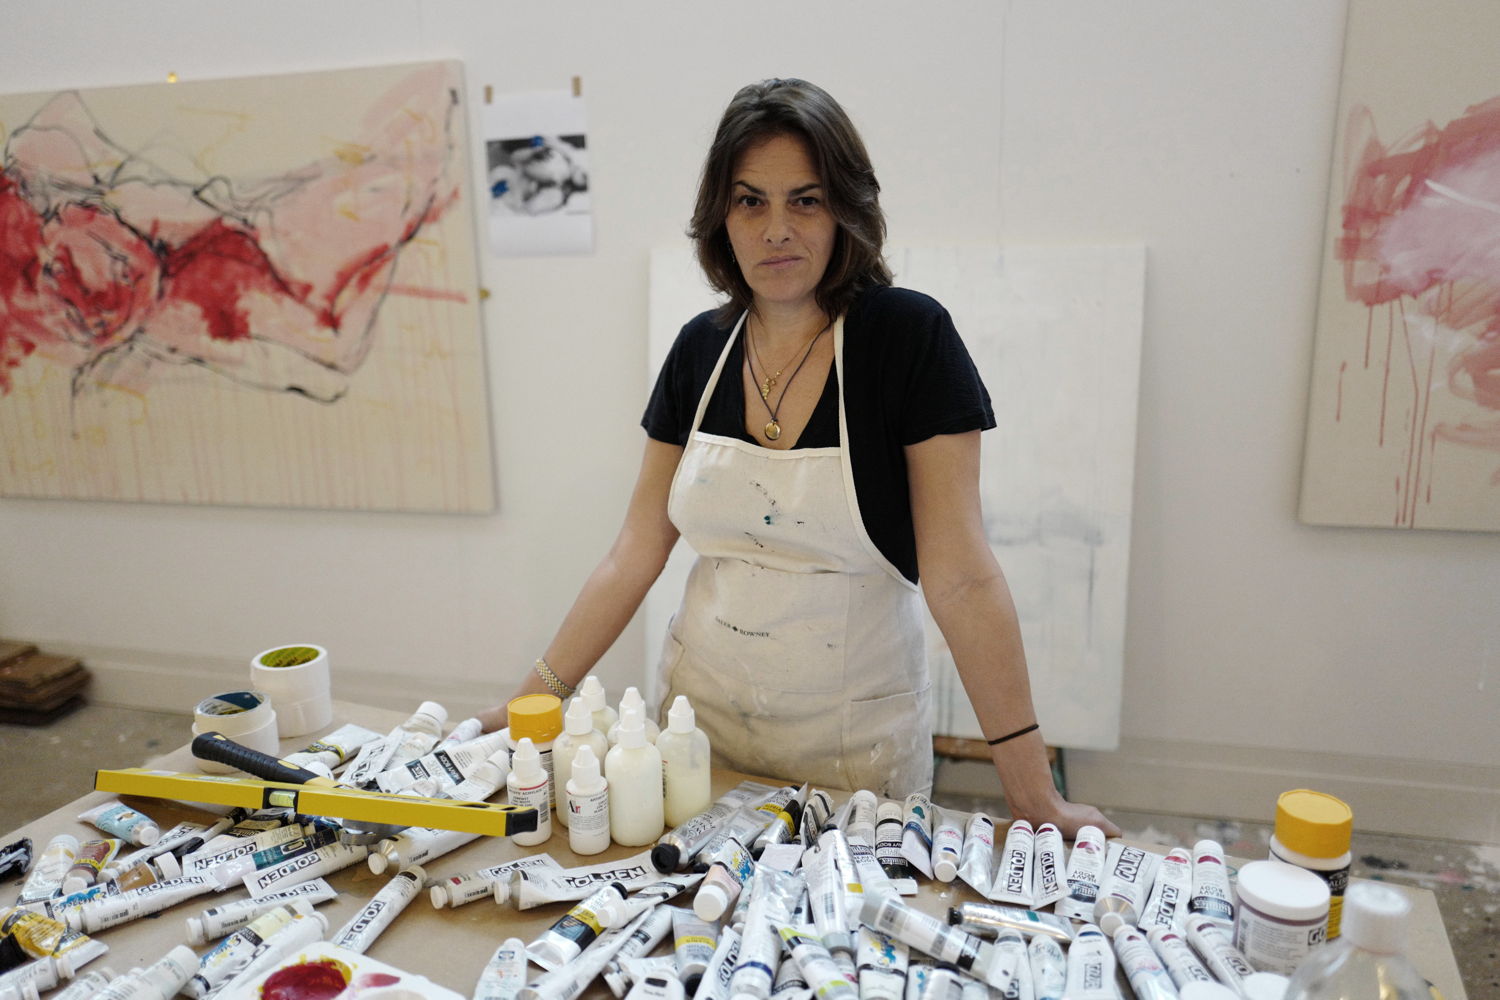 Richard Young, Tracey Emin in her Studio, London, January 2016